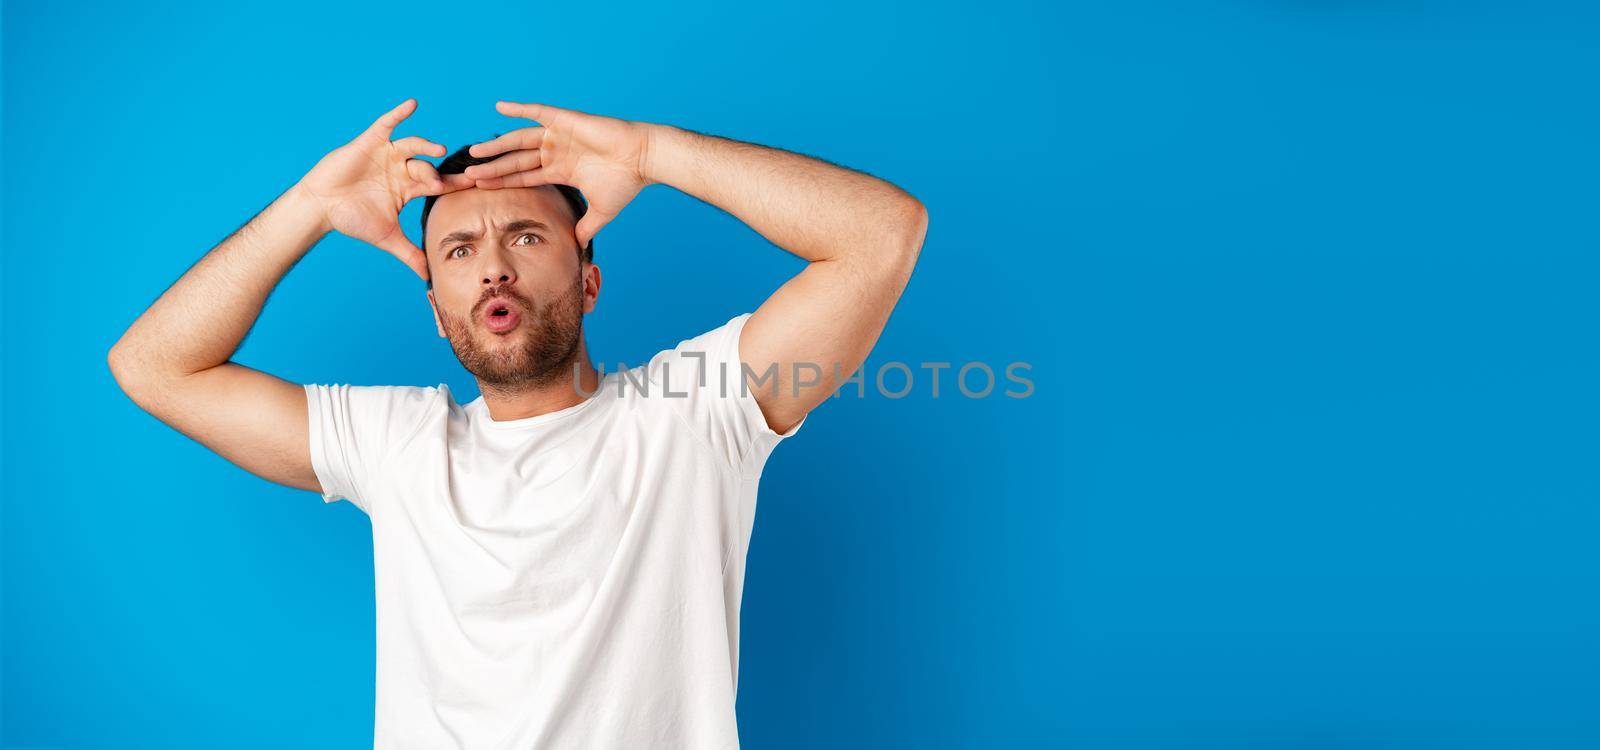 Portrait of a confused young man holding hands on his head over blue background by Fabrikasimf